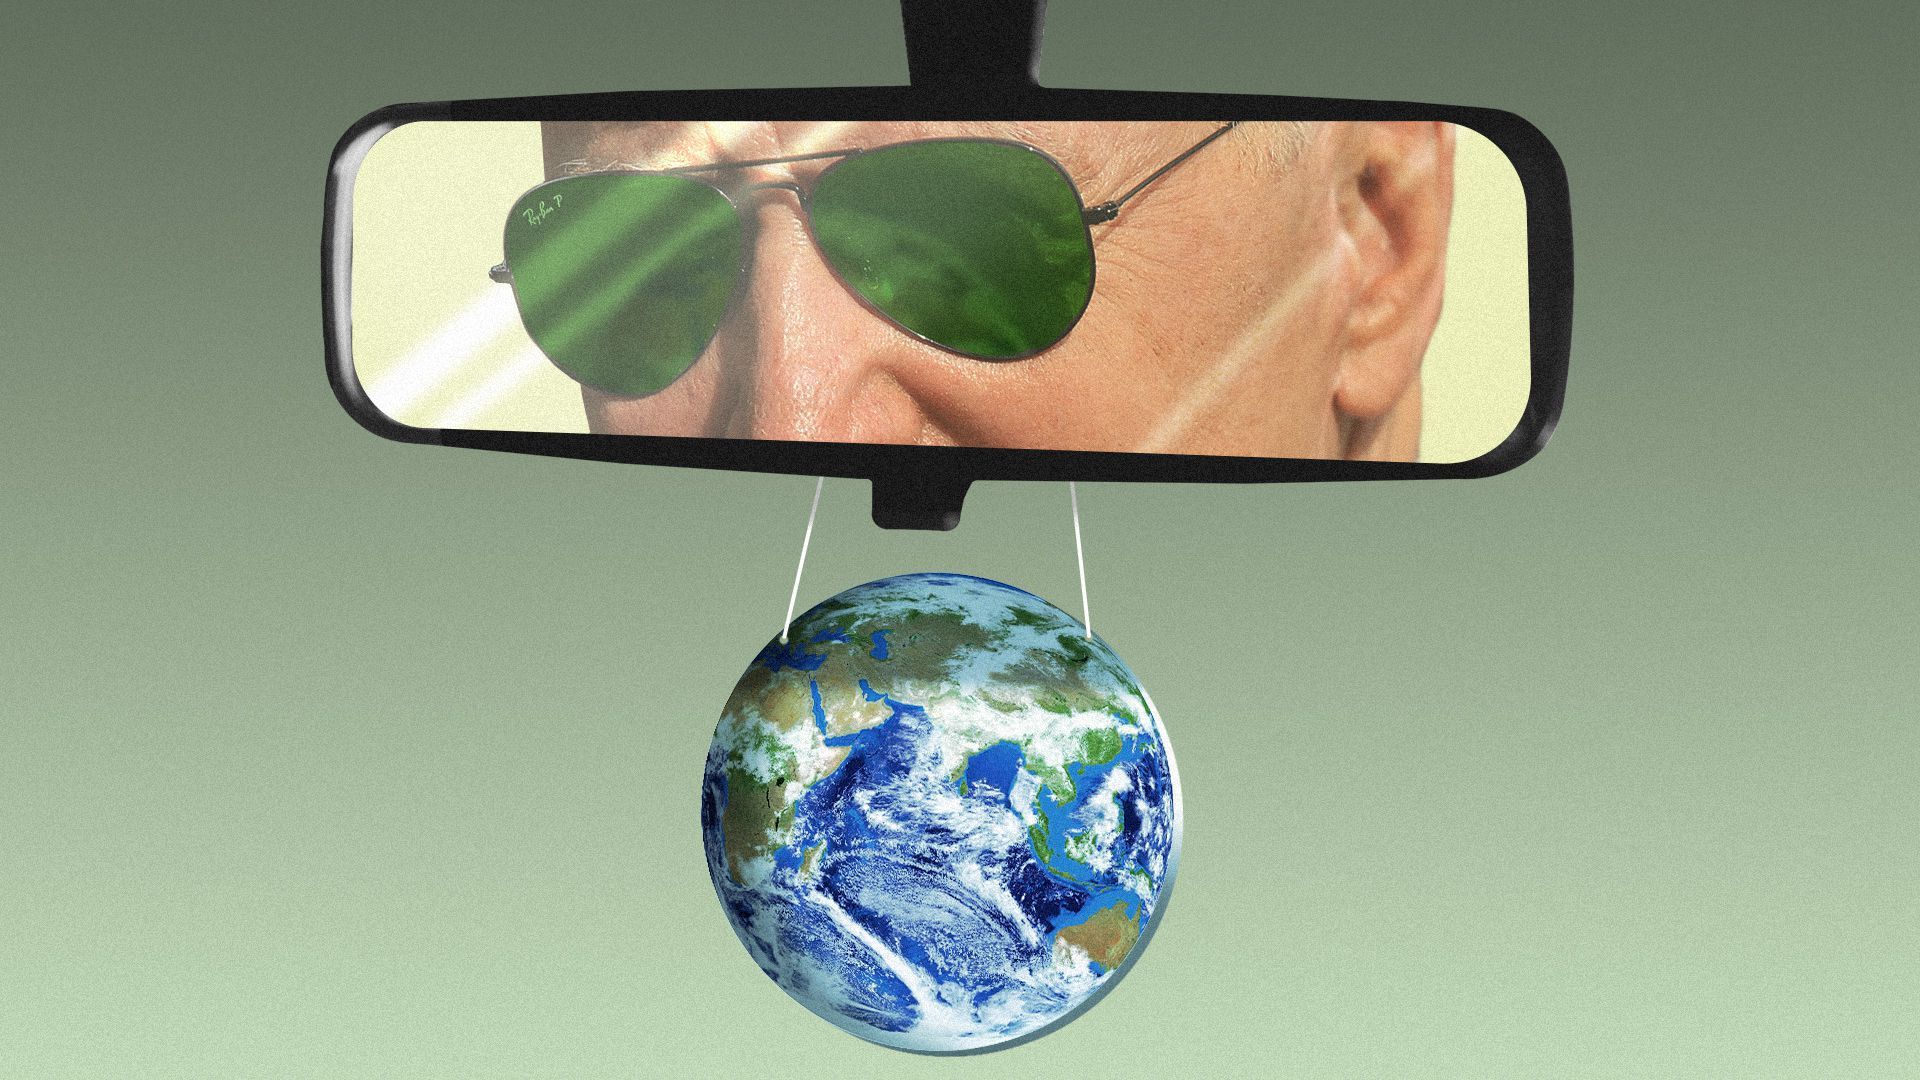 An illustration showing Biden looking in rearview mirror with a globe hanging from it